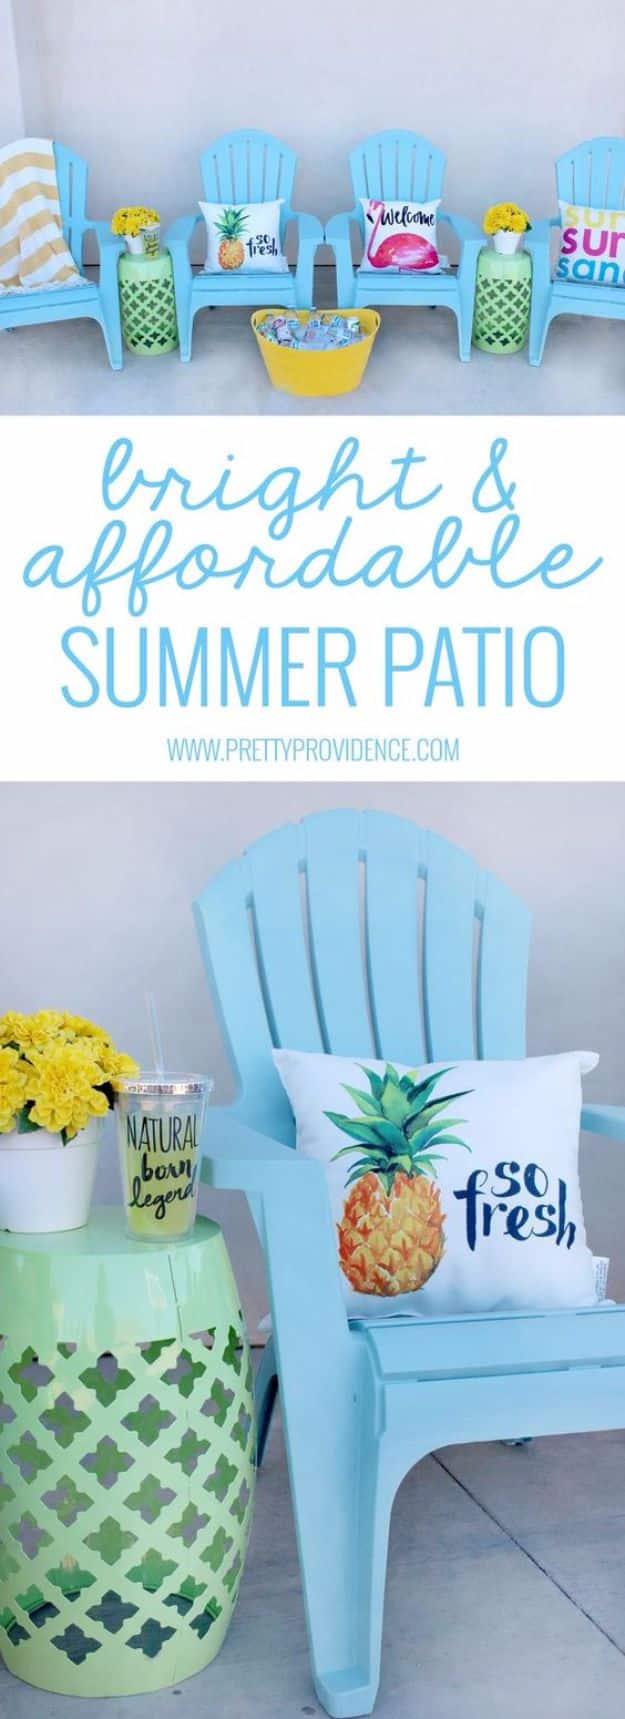 DIY Patio Furniture Ideas - Bright Summer Patio Chairs - Cheap Do It Yourself Porch and Easy Backyard Furniture, Rocking Chairs, Swings, Benches, Stools and Seating Tutorials - Dining Tables from Pallets, Cinder Blocks and Upcyle Ideas - Sectional Couch Plans With Cushions - Makeover Tips for Existing Furniture #diyideas #outdoors #diy #backyardideas #diyfurniture #patio #diyjoy http://diyjoy.com/diy-patio-furniture-ideas